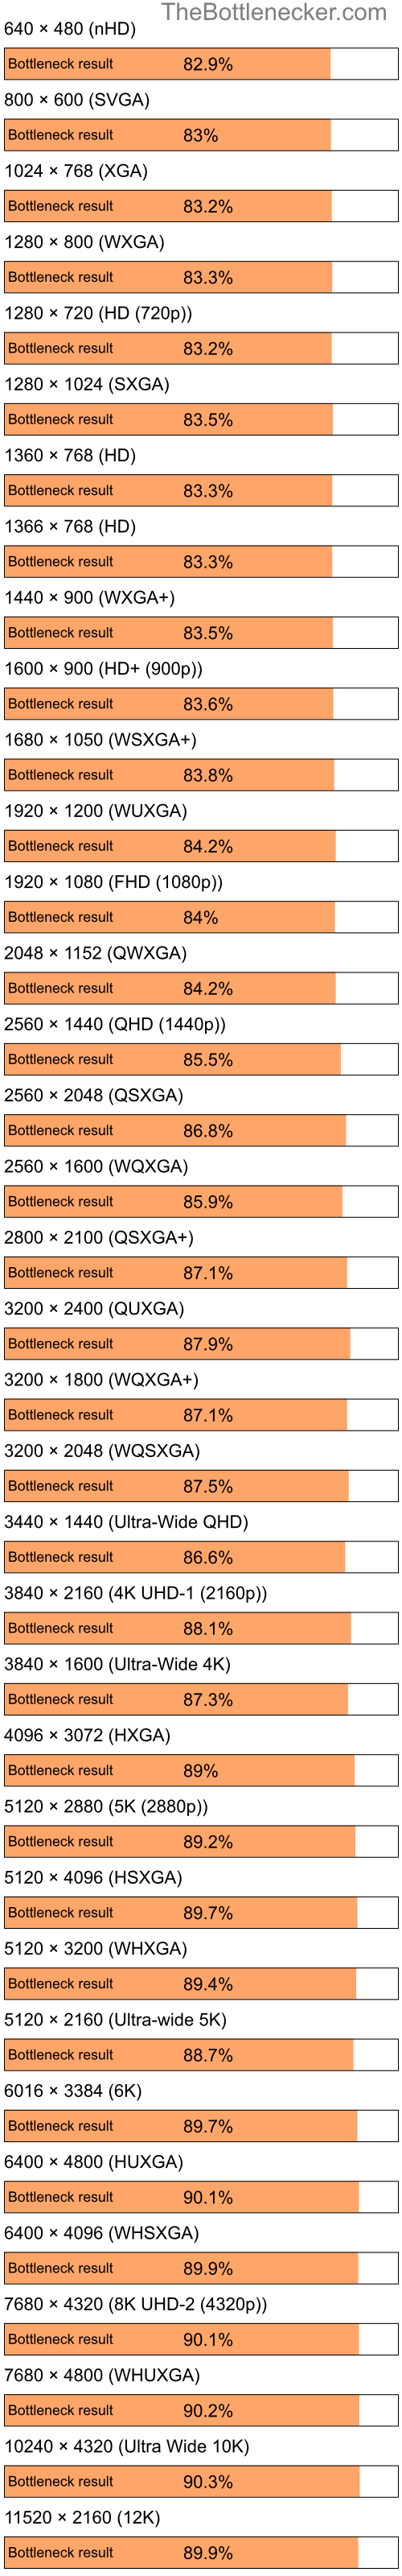 Bottleneck results by resolution for Intel Celeron and NVIDIA GeForce 6100 in Graphic Card Intense Tasks